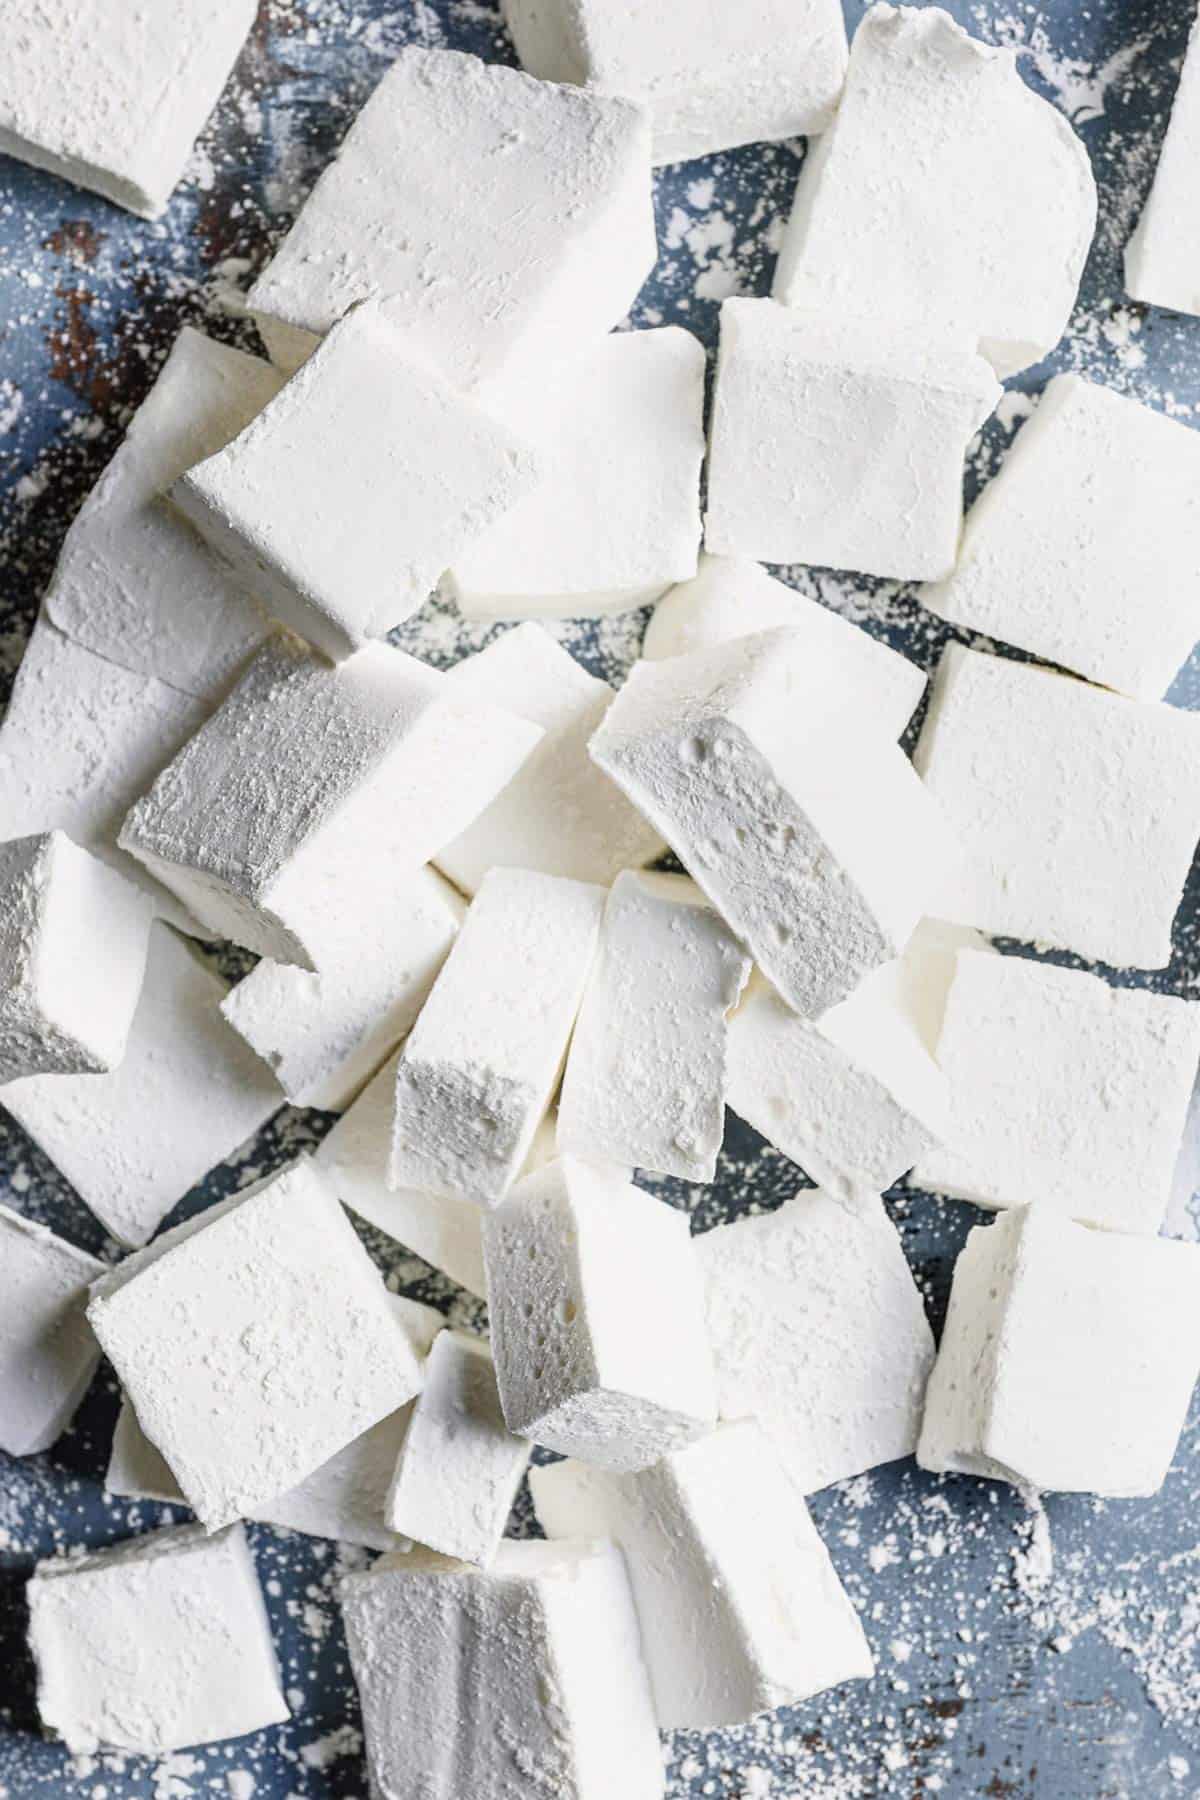 A pile of cut marshmallows on a blue counter dusted with powdered sugar.